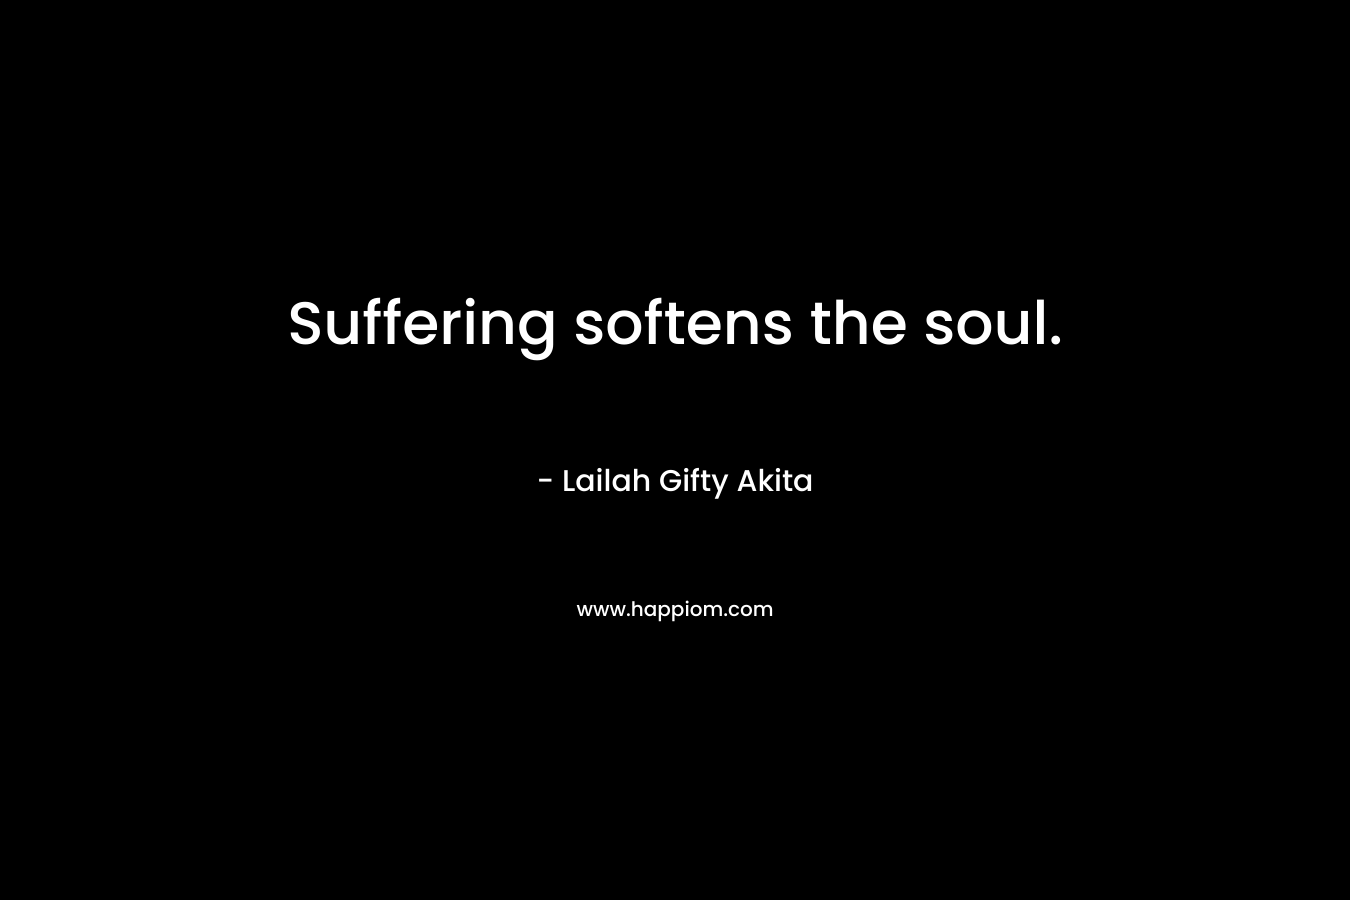 Suffering softens the soul.